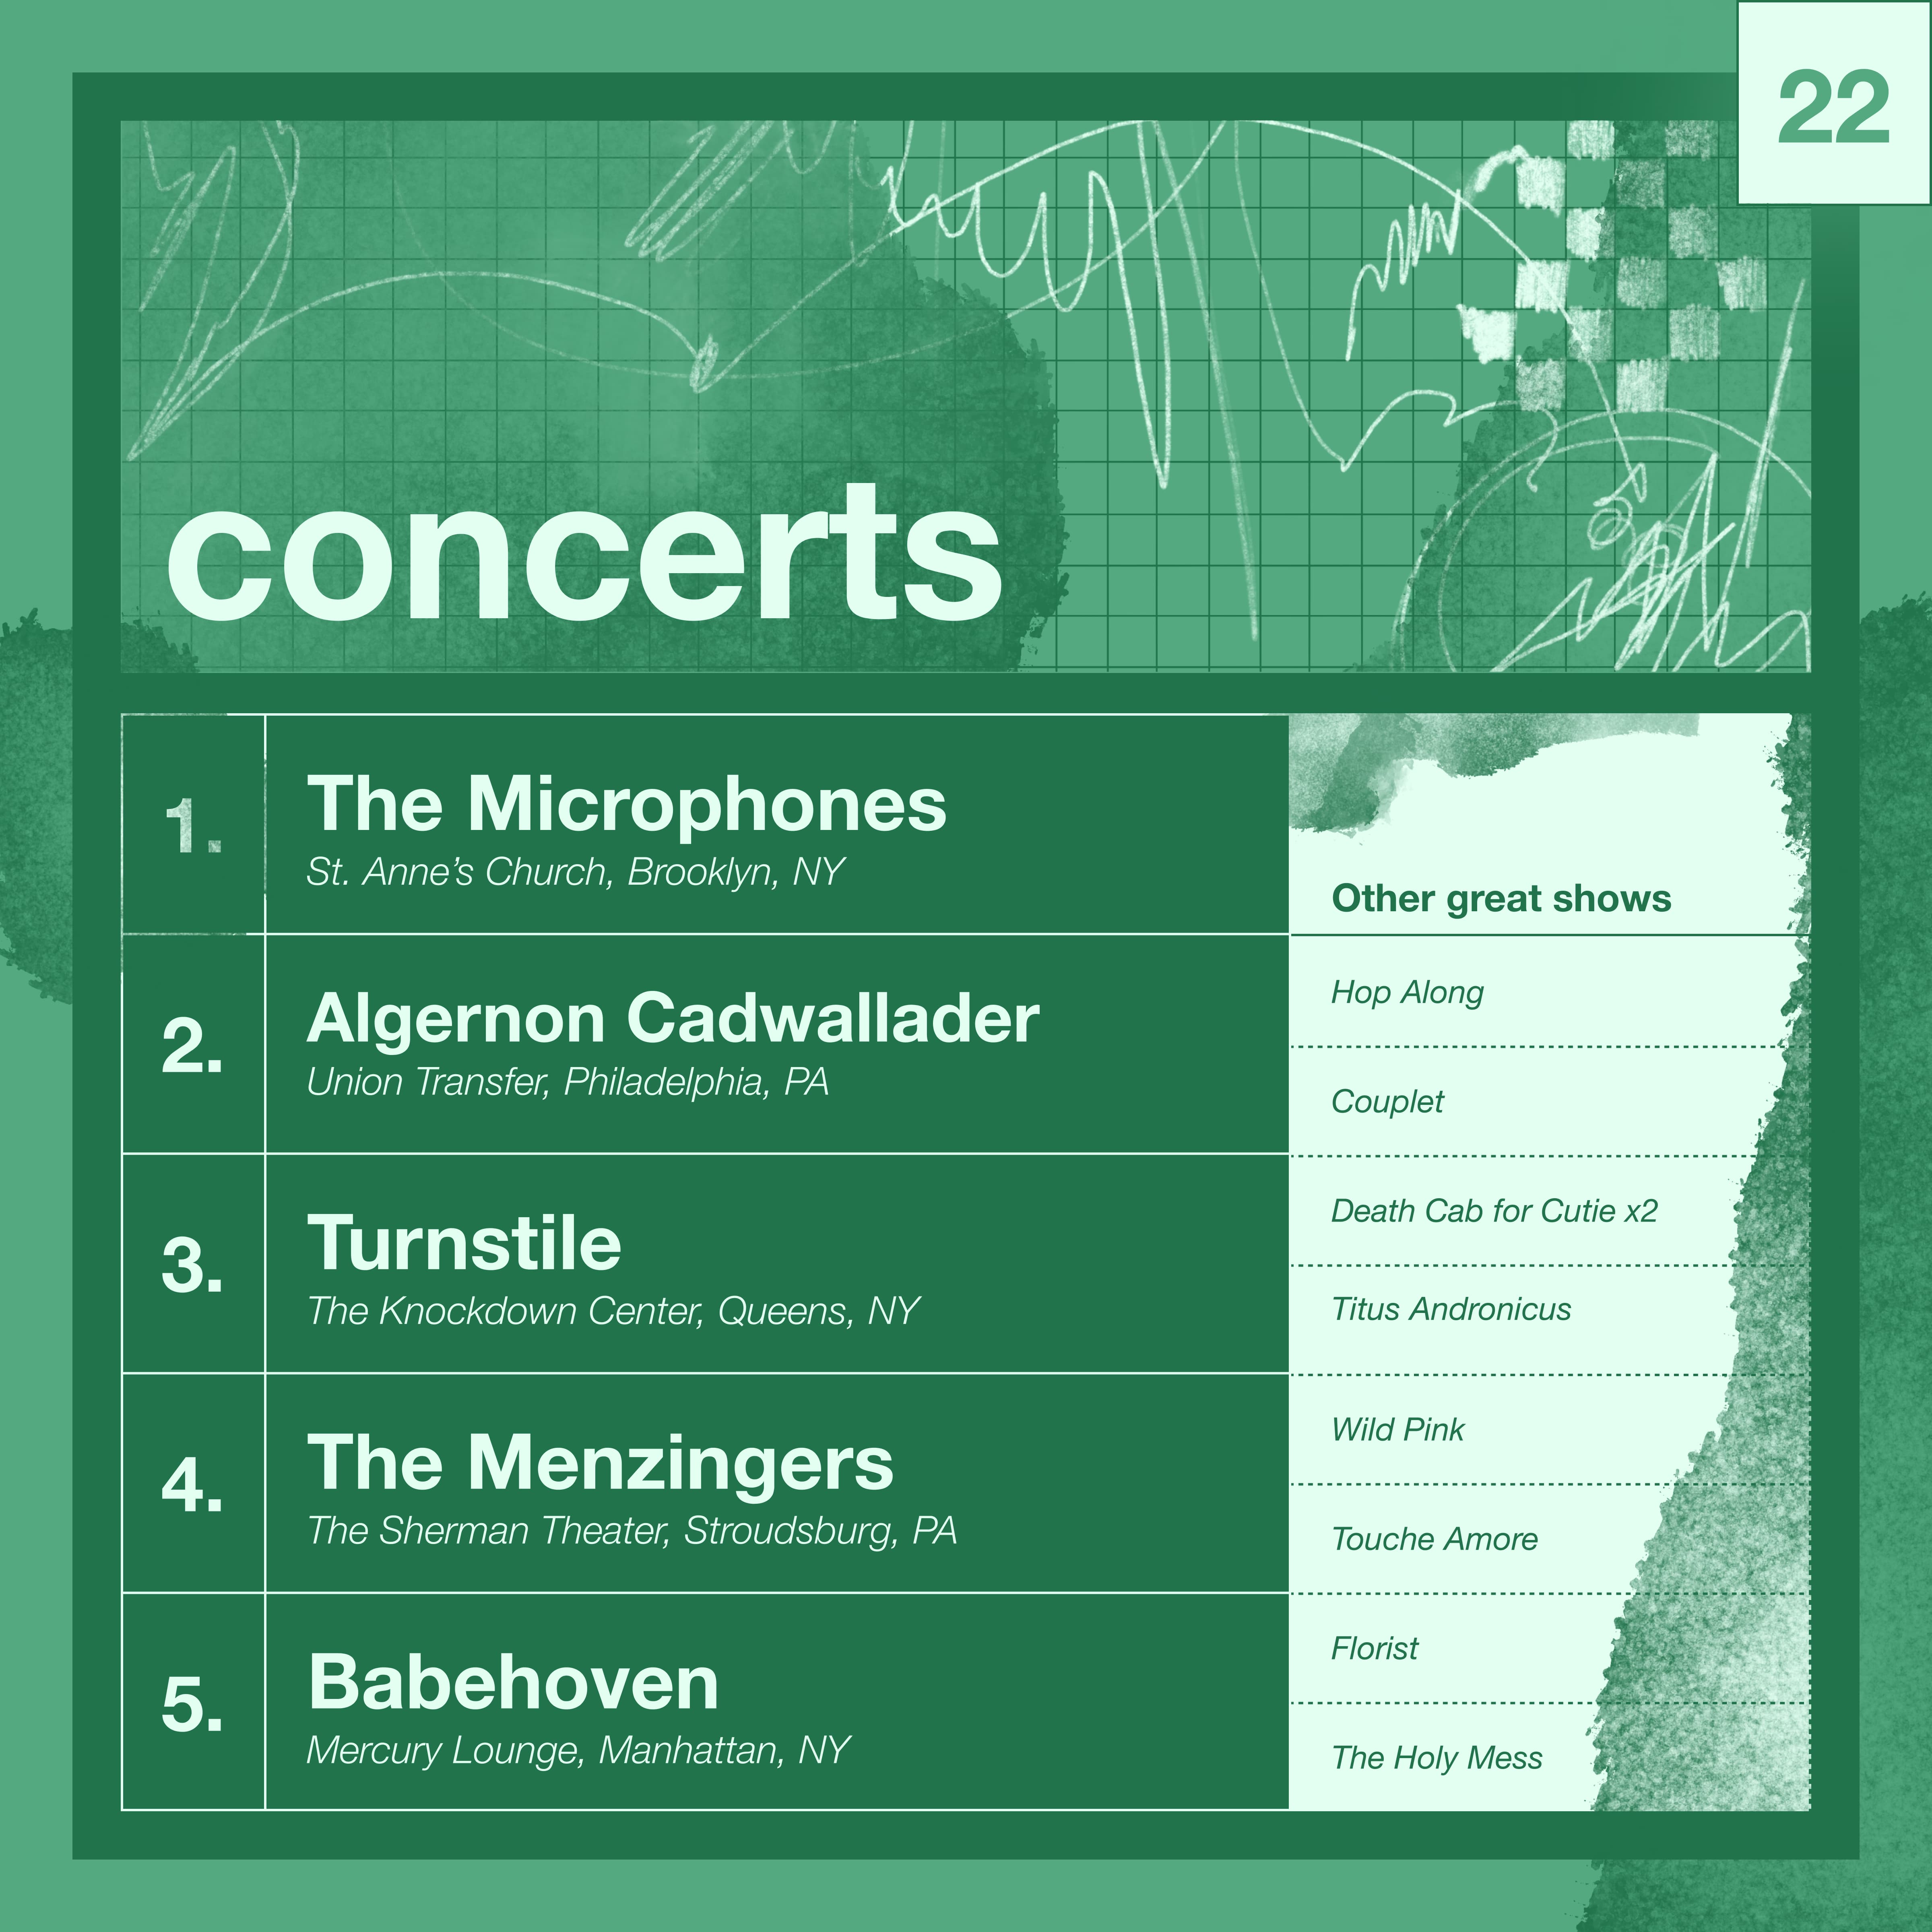 Top concerts of the year